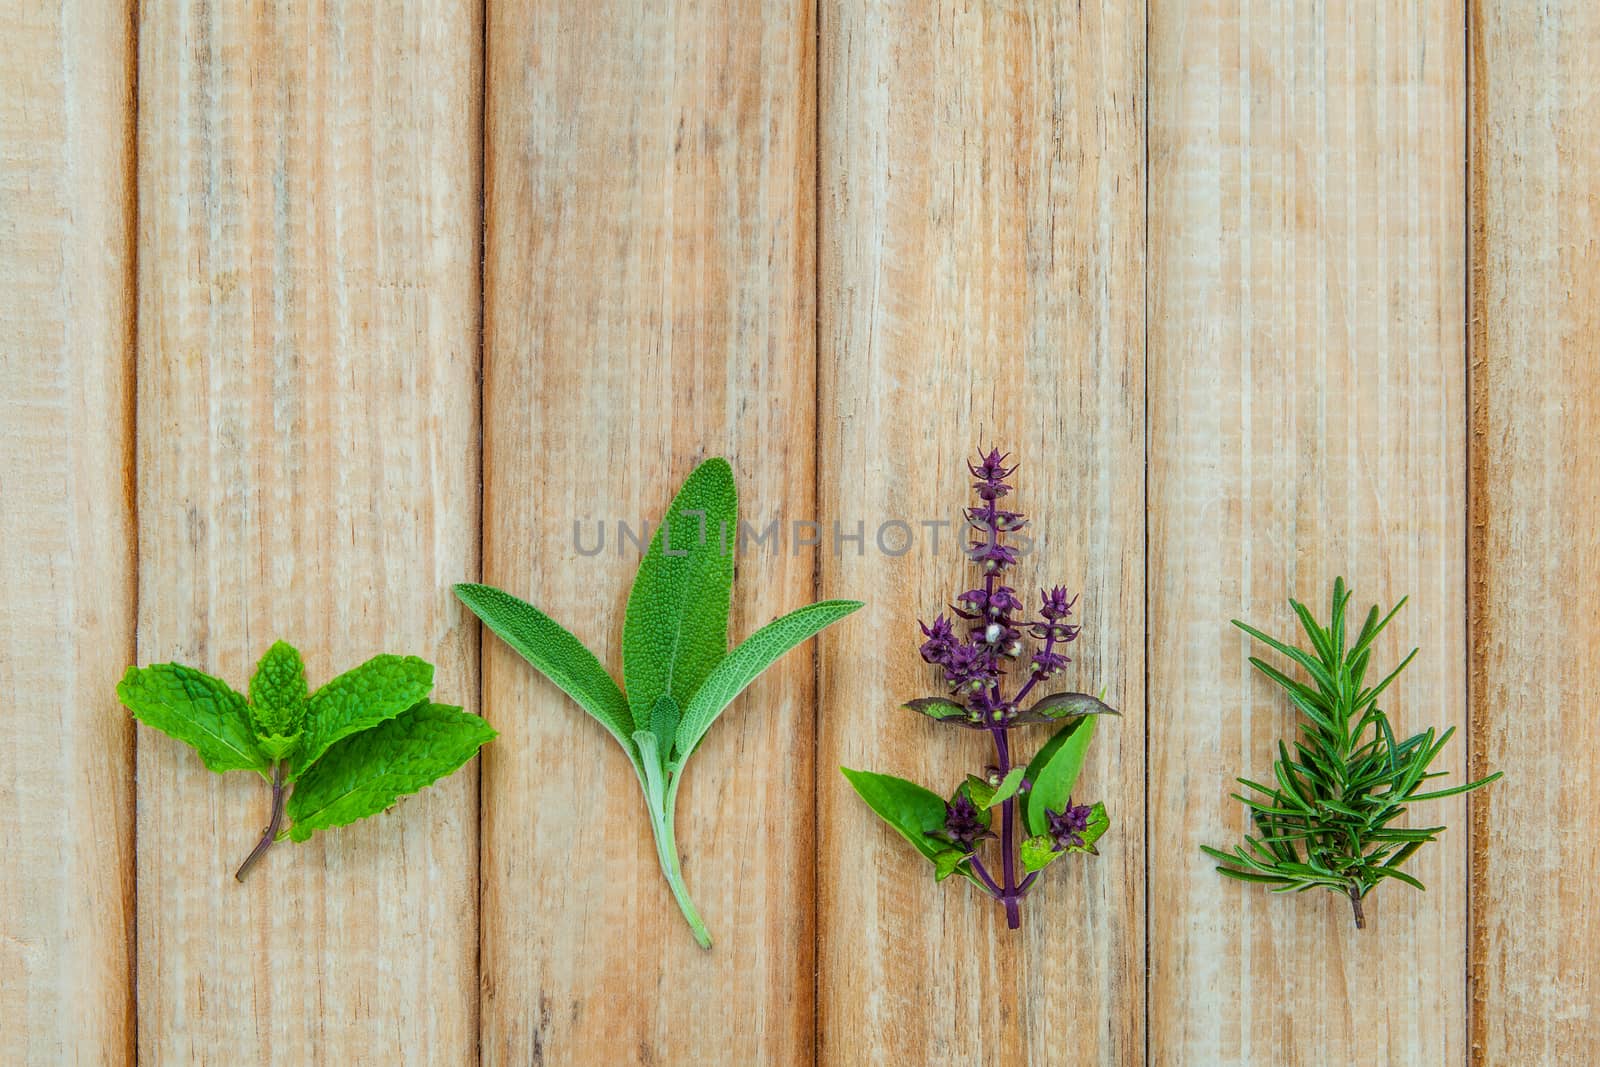 Various fresh herbs from the garden holy basil flower, basil flower,rosemary, sage over rustic wooden background.